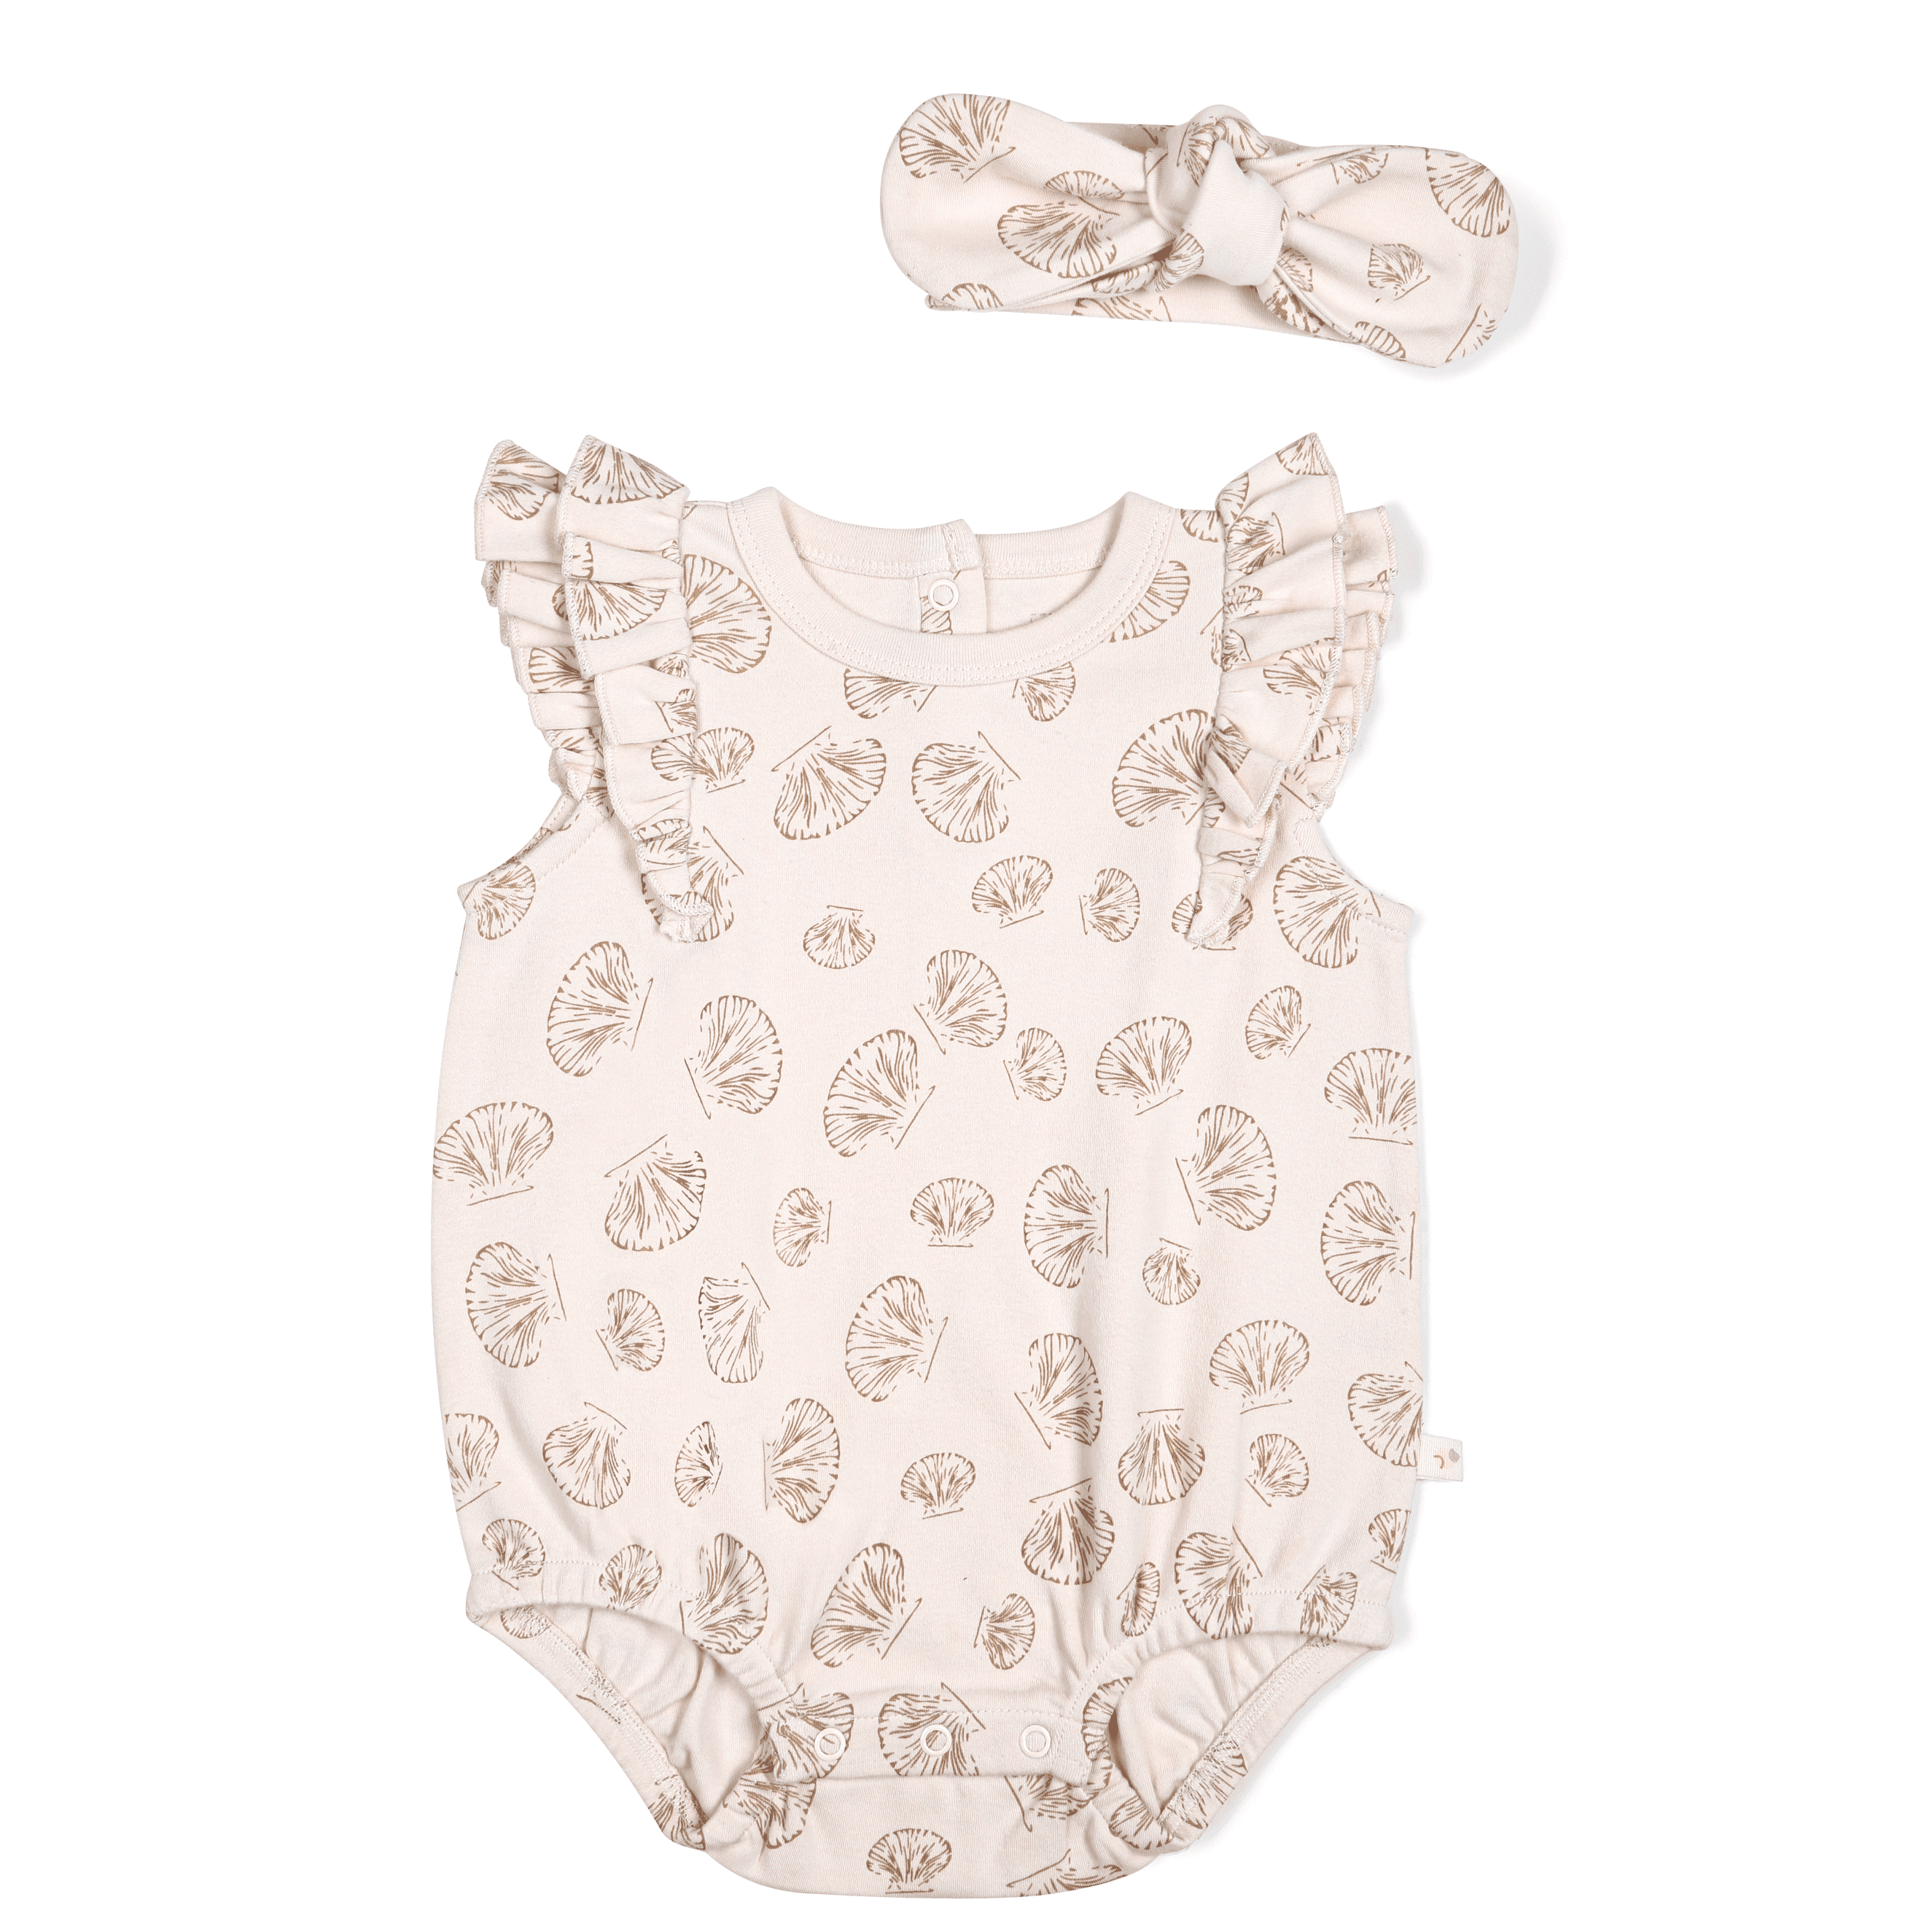 A toddler's Organic Flutter Bubble Onesie in Seashells by Makemake Organics with a leaf pattern and matching shoes, displayed on a white background. The onesie features ruffled sleeves.